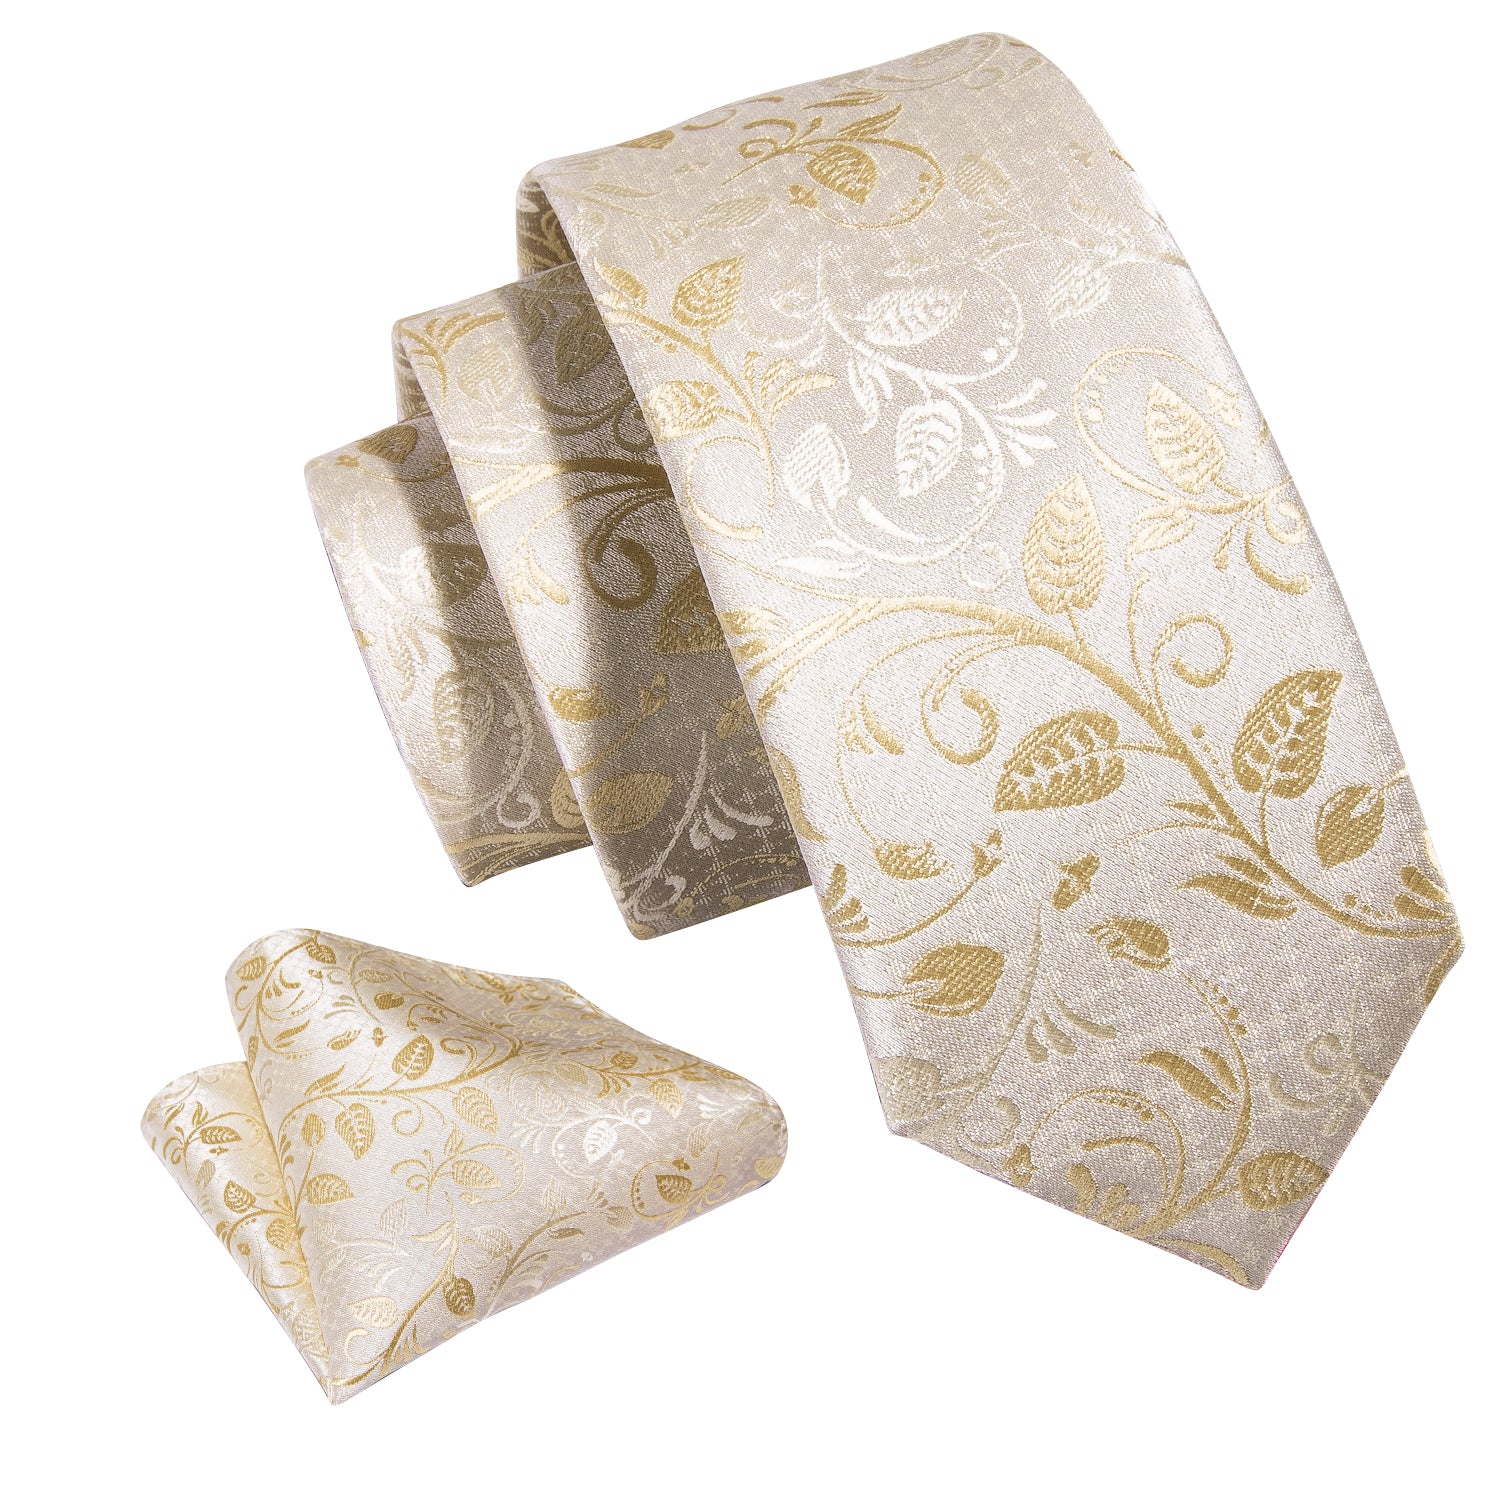 Barry.wang Floral Tie Children Champagne Gold Tie Pocket Square Set